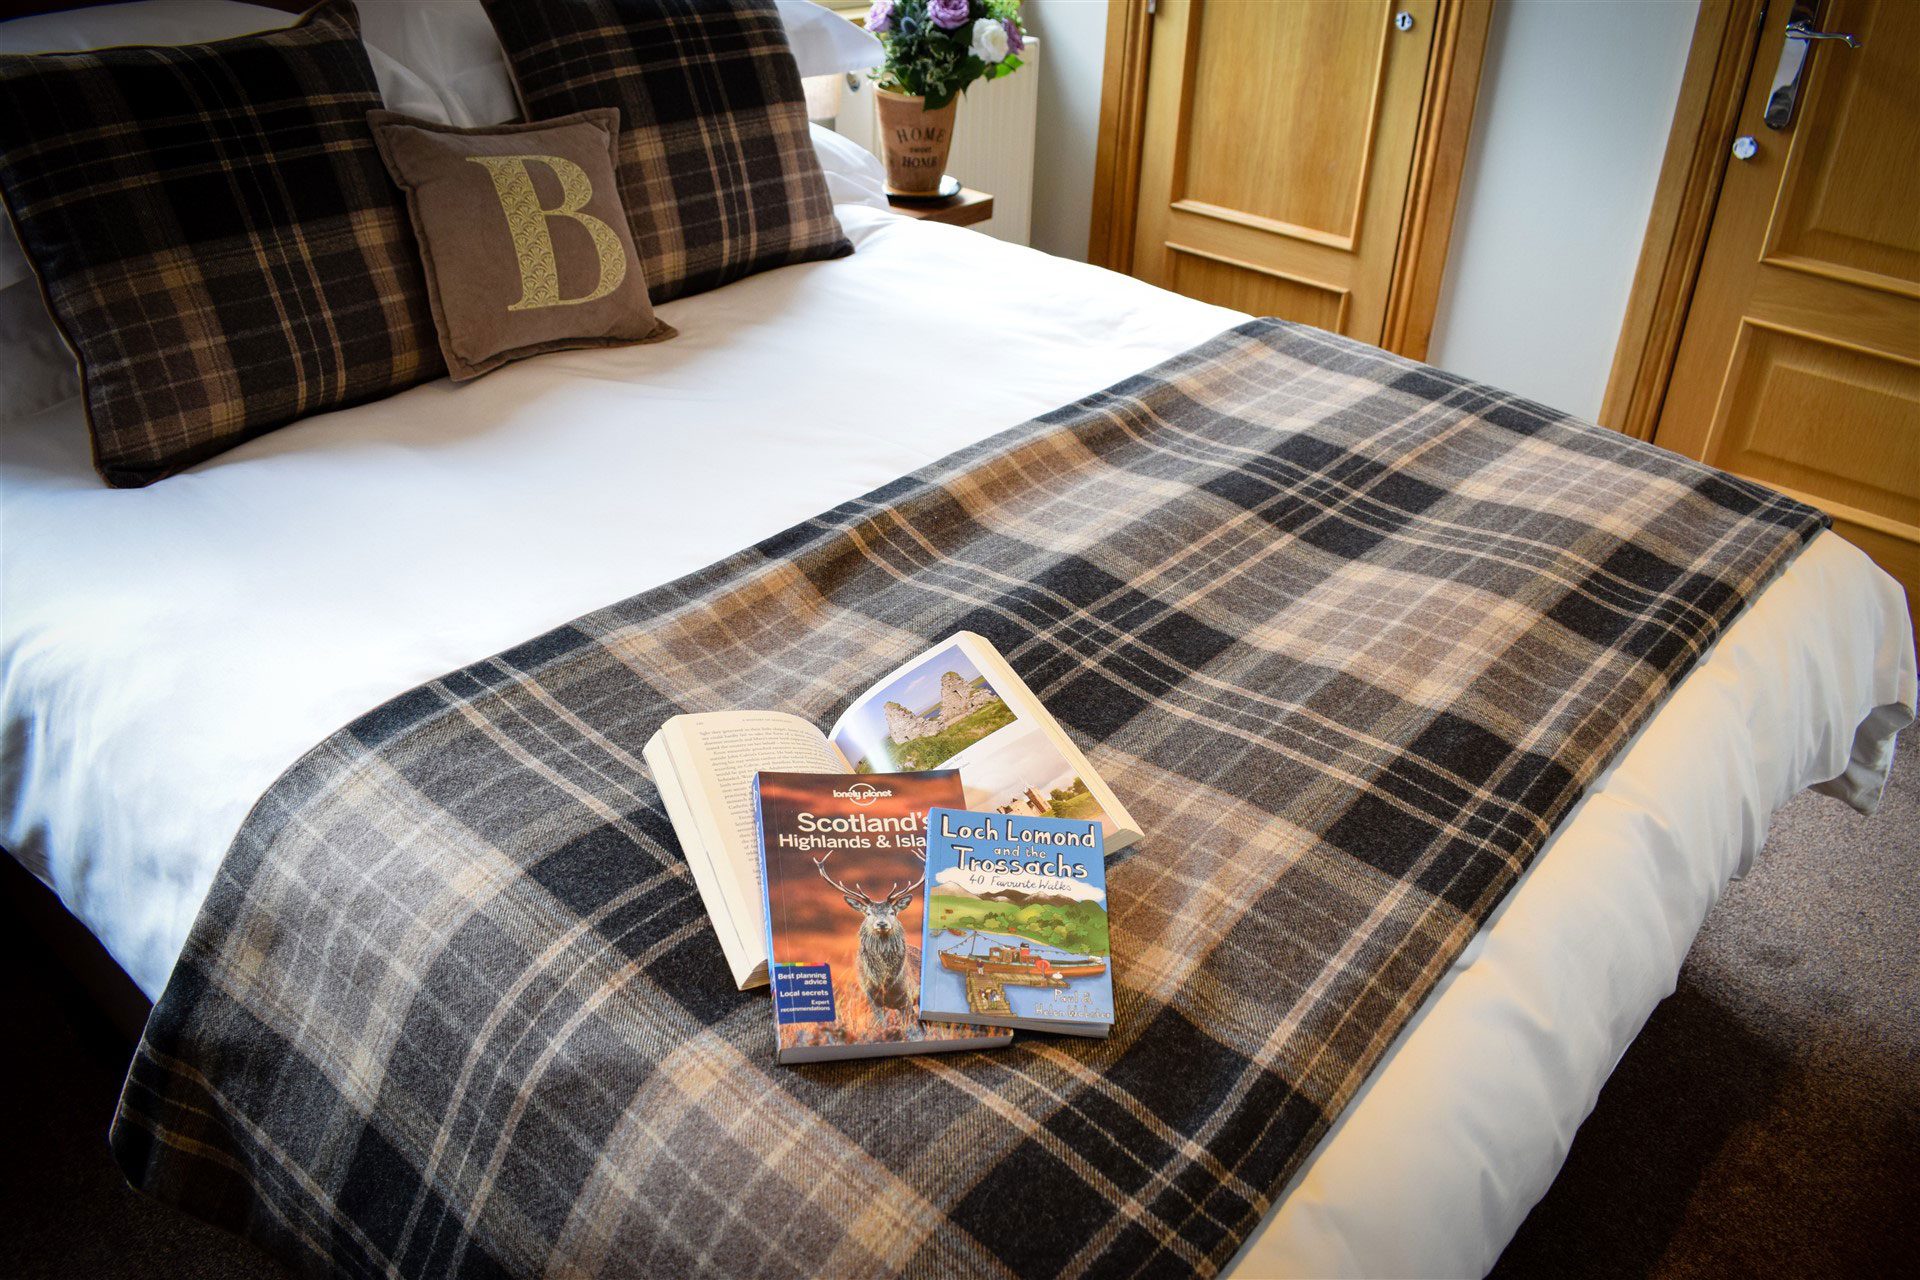 Relax at Benoch Luxury Self-catering and plan where you're going to explore around Loch Lomond